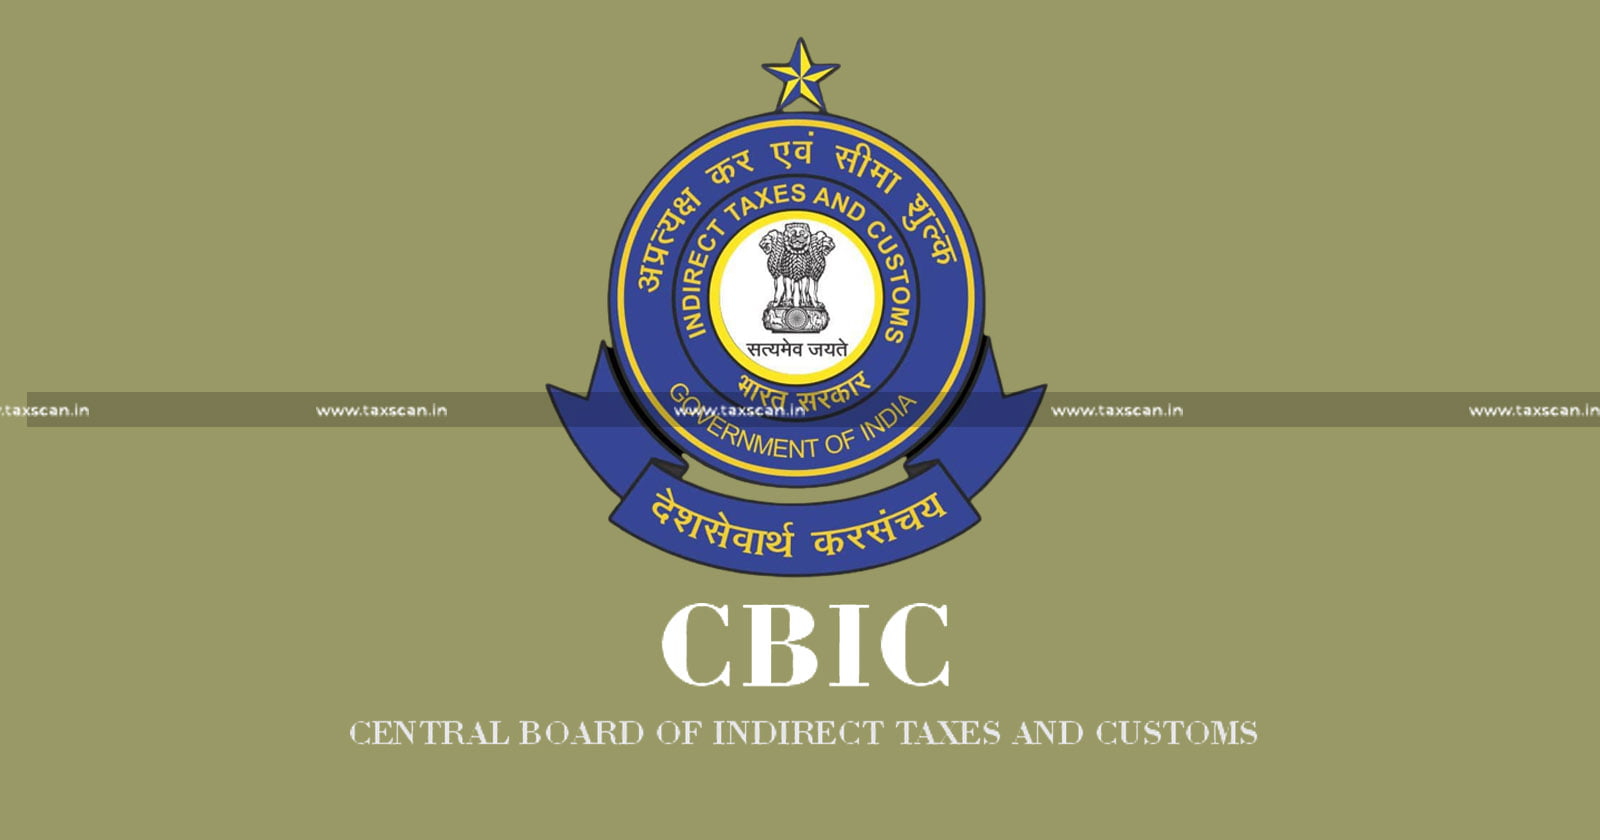 CBIC - CBIC Legal Cell launches Online Portal - Samay Application - Guidelines for Samay Application - Special Leave Petition - Civil Appeal - CBIC Legal Cell - TAXSCAN